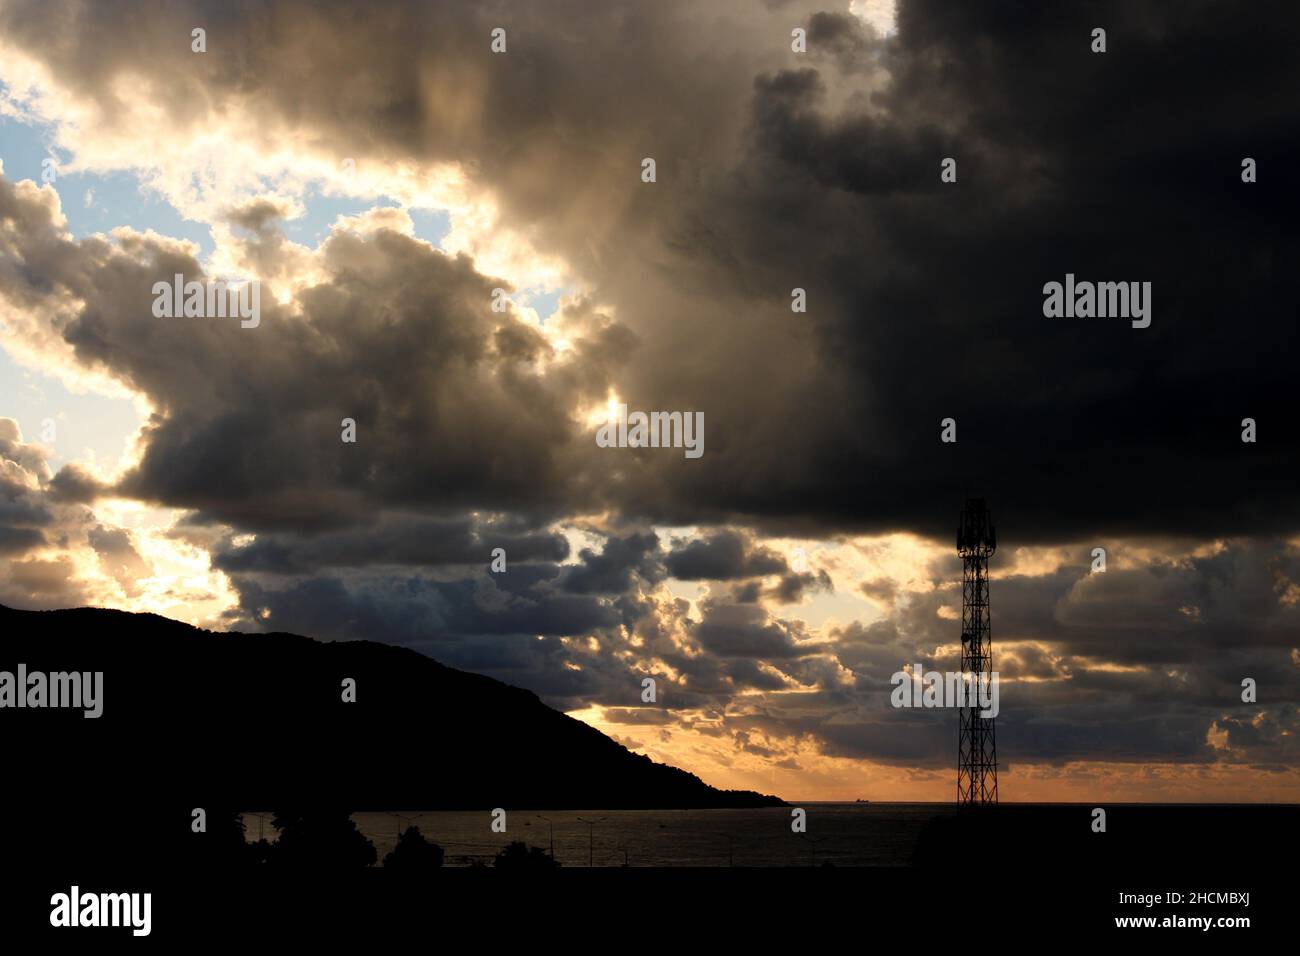 Dark storm clouds at sunset, dark storm clouds with sunrays, mountain and radio tower silhouette over the sea. Climate and storm concept Stock Photo